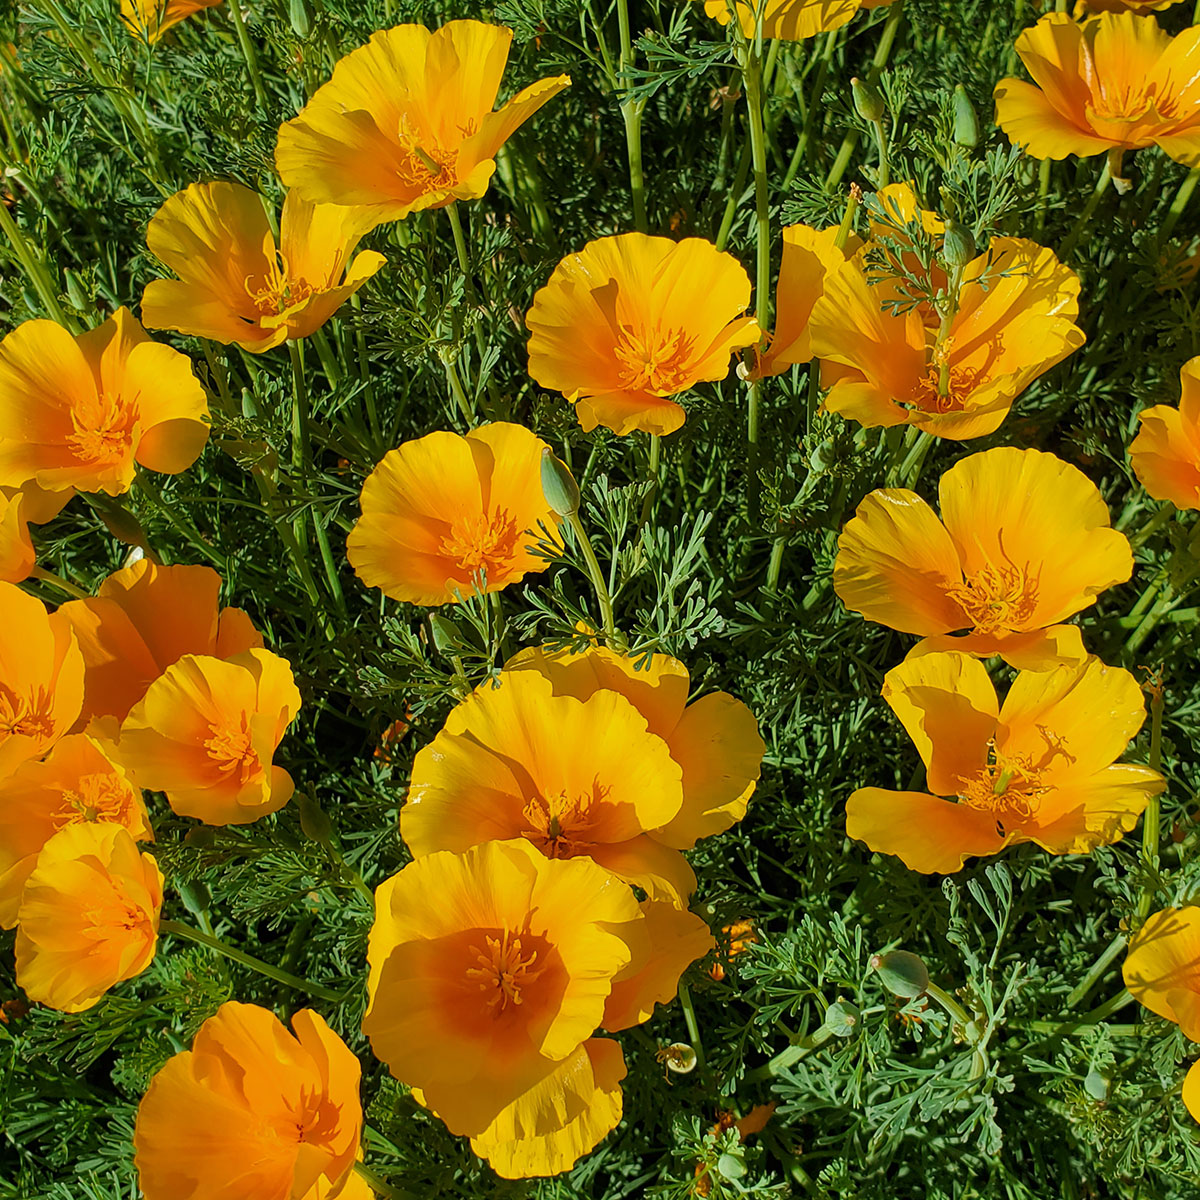 An annual wildflower native to the western US and Mexico and the state flower of California. Showy, 1-3 inch, four-petaled flowers open only on sunny days in the spring.  Orange to yellow in color. Drought tolerant, self-seeding, and easy to grow in gardens. Prefers well drained soil and full sun. Plant in the Fall.